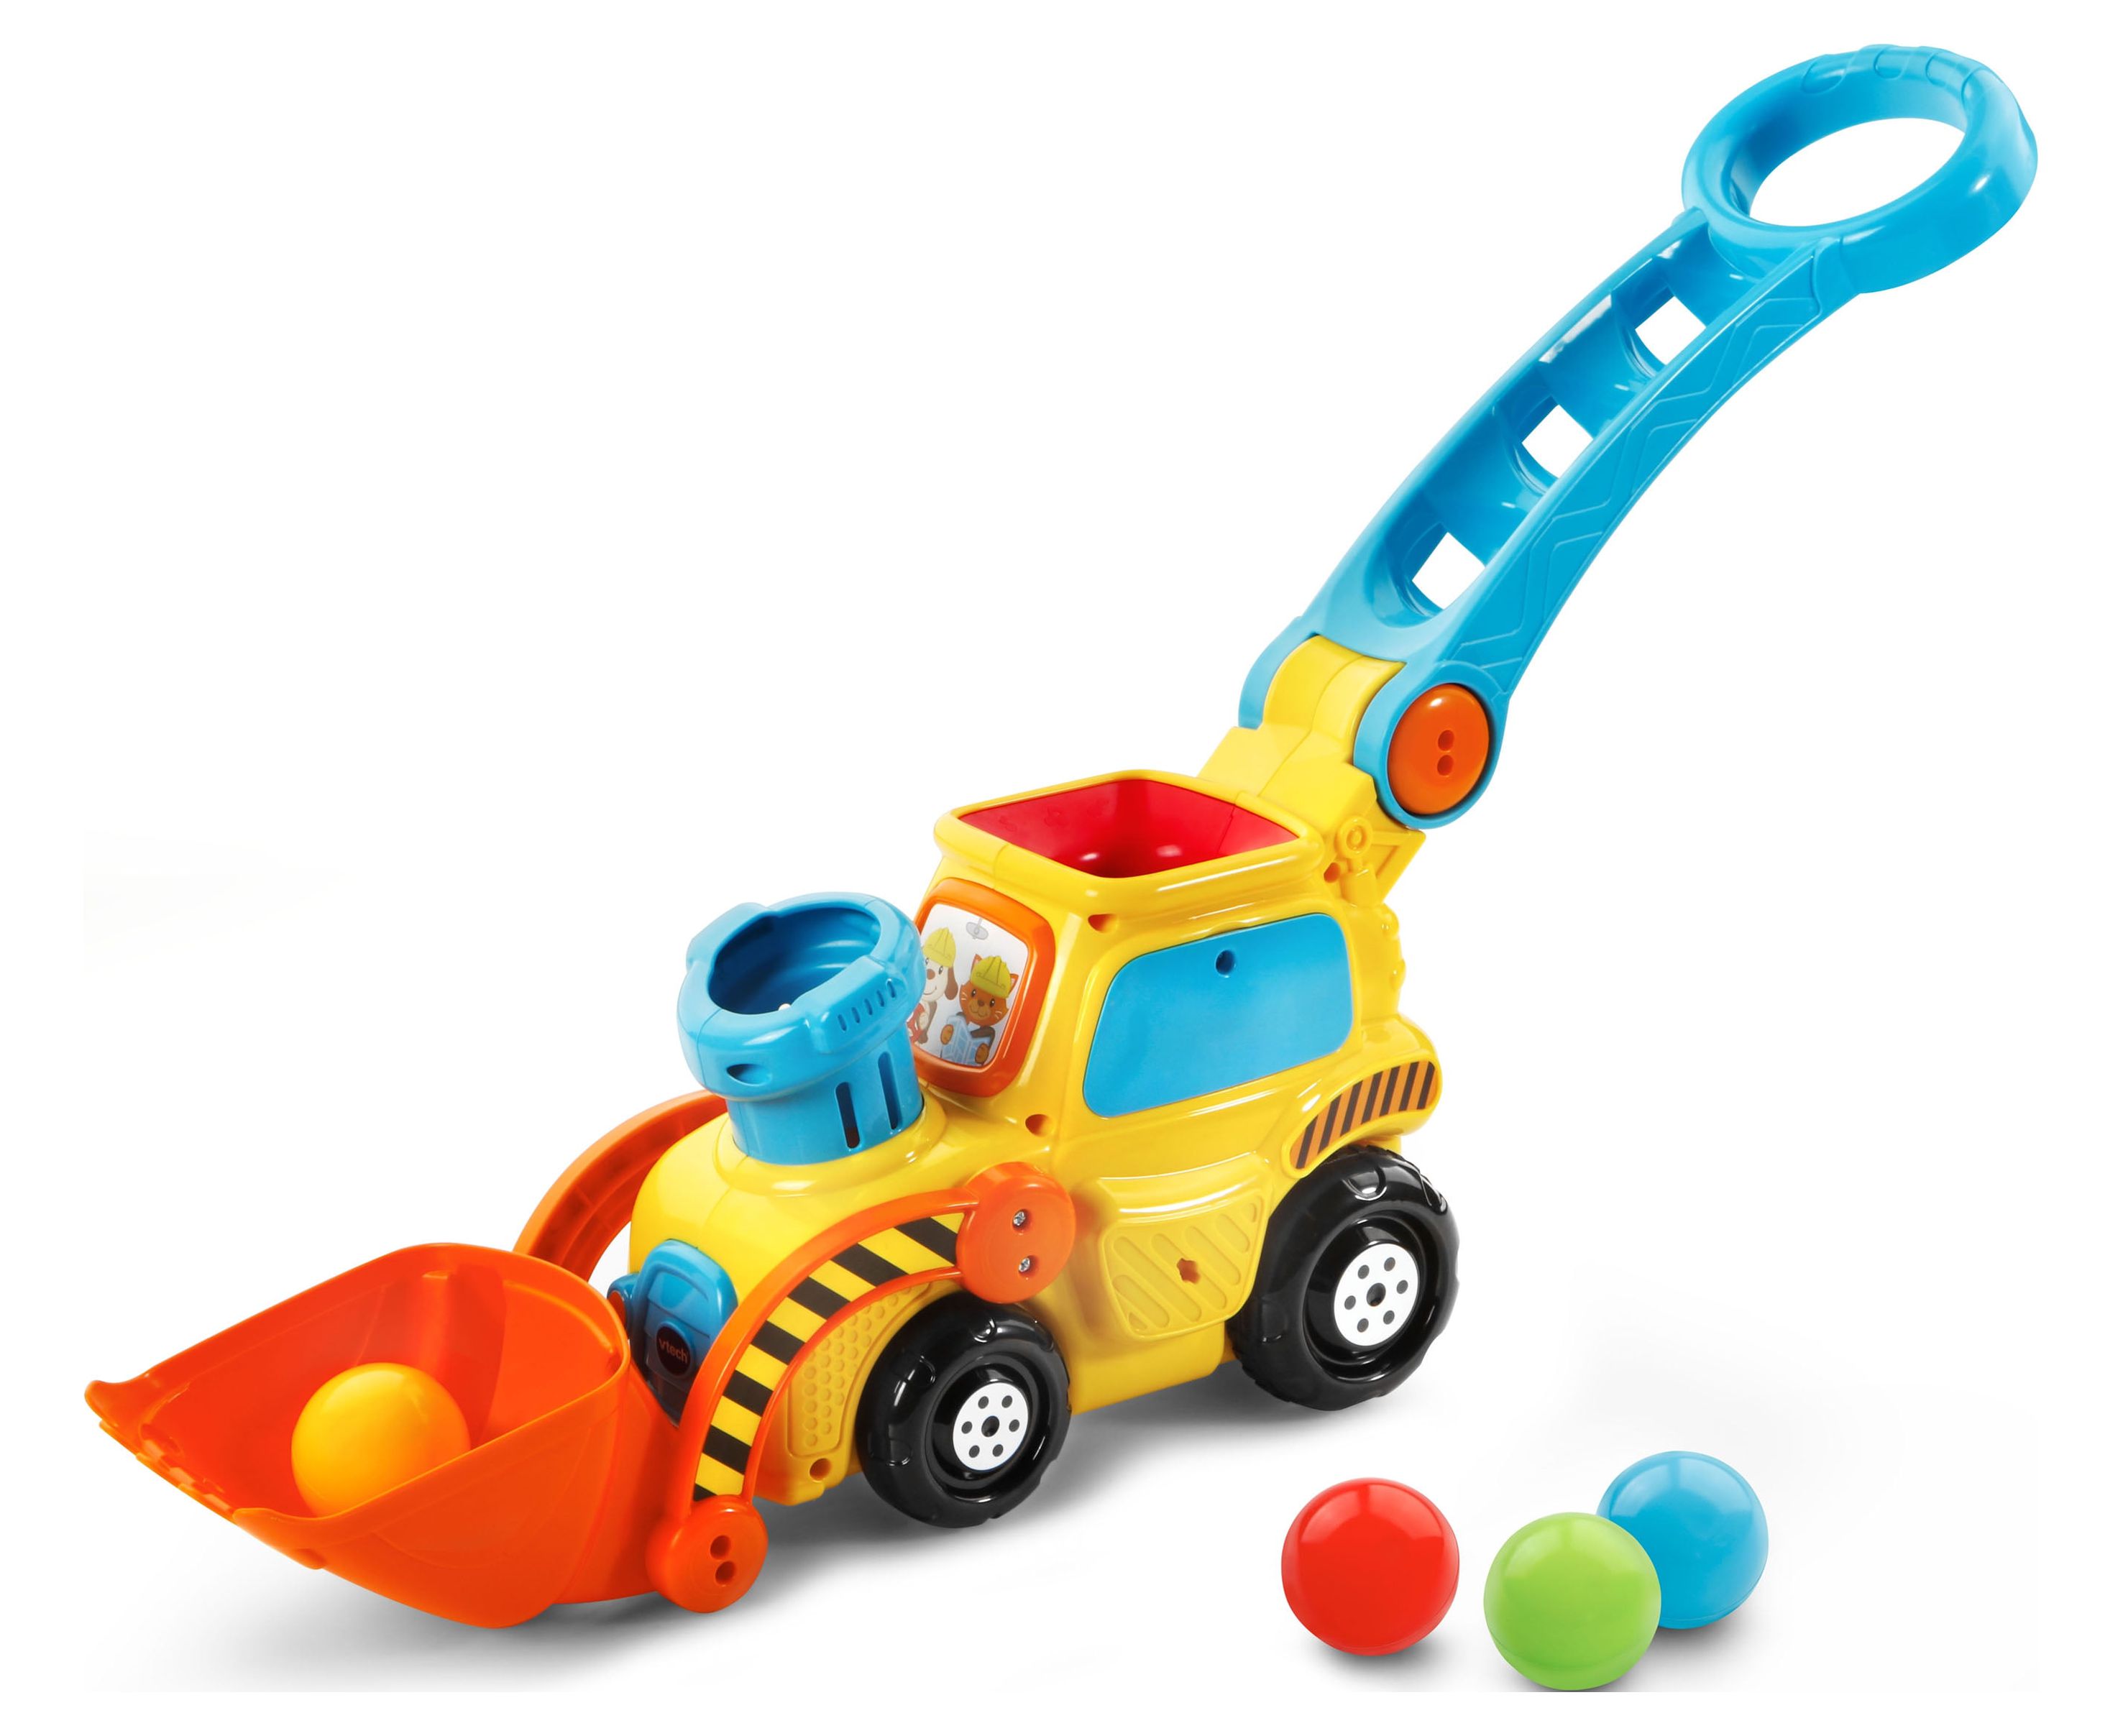 VTech, Pop-a-Balls, Push and Pop Bulldozer, Toddler Learning Toy - image 3 of 12